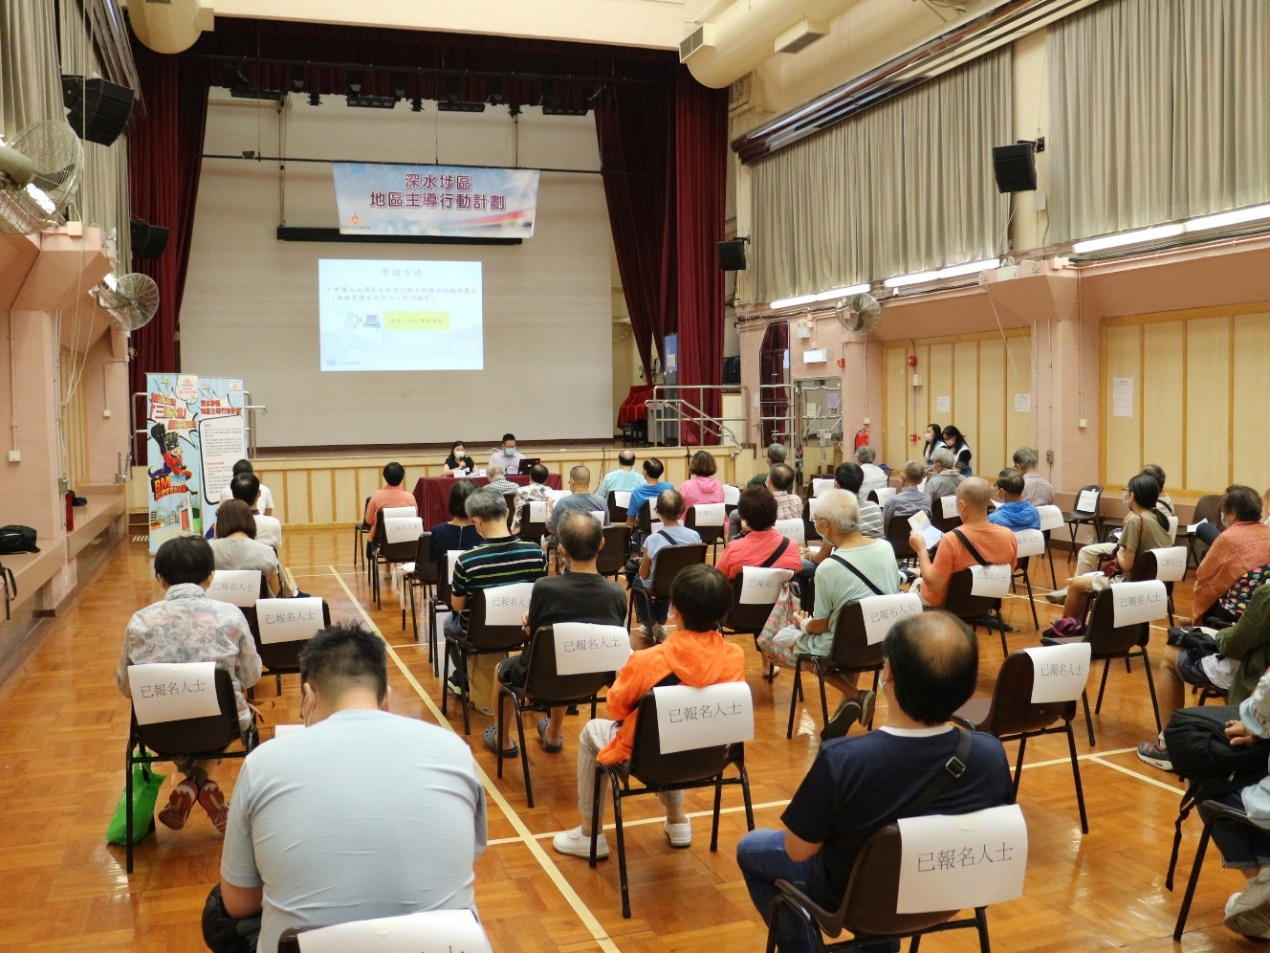 Sham Shui Po District-led Actions Scheme – Building Management Talk (Introduction on “Best Practices on Building Management”, “Enhancement of In-Building Tele-communications System and Registration Scheme for Buildings with Optical Fiber Access Networks” and “ Service of Property Alert”) 
(16 September 2021)
